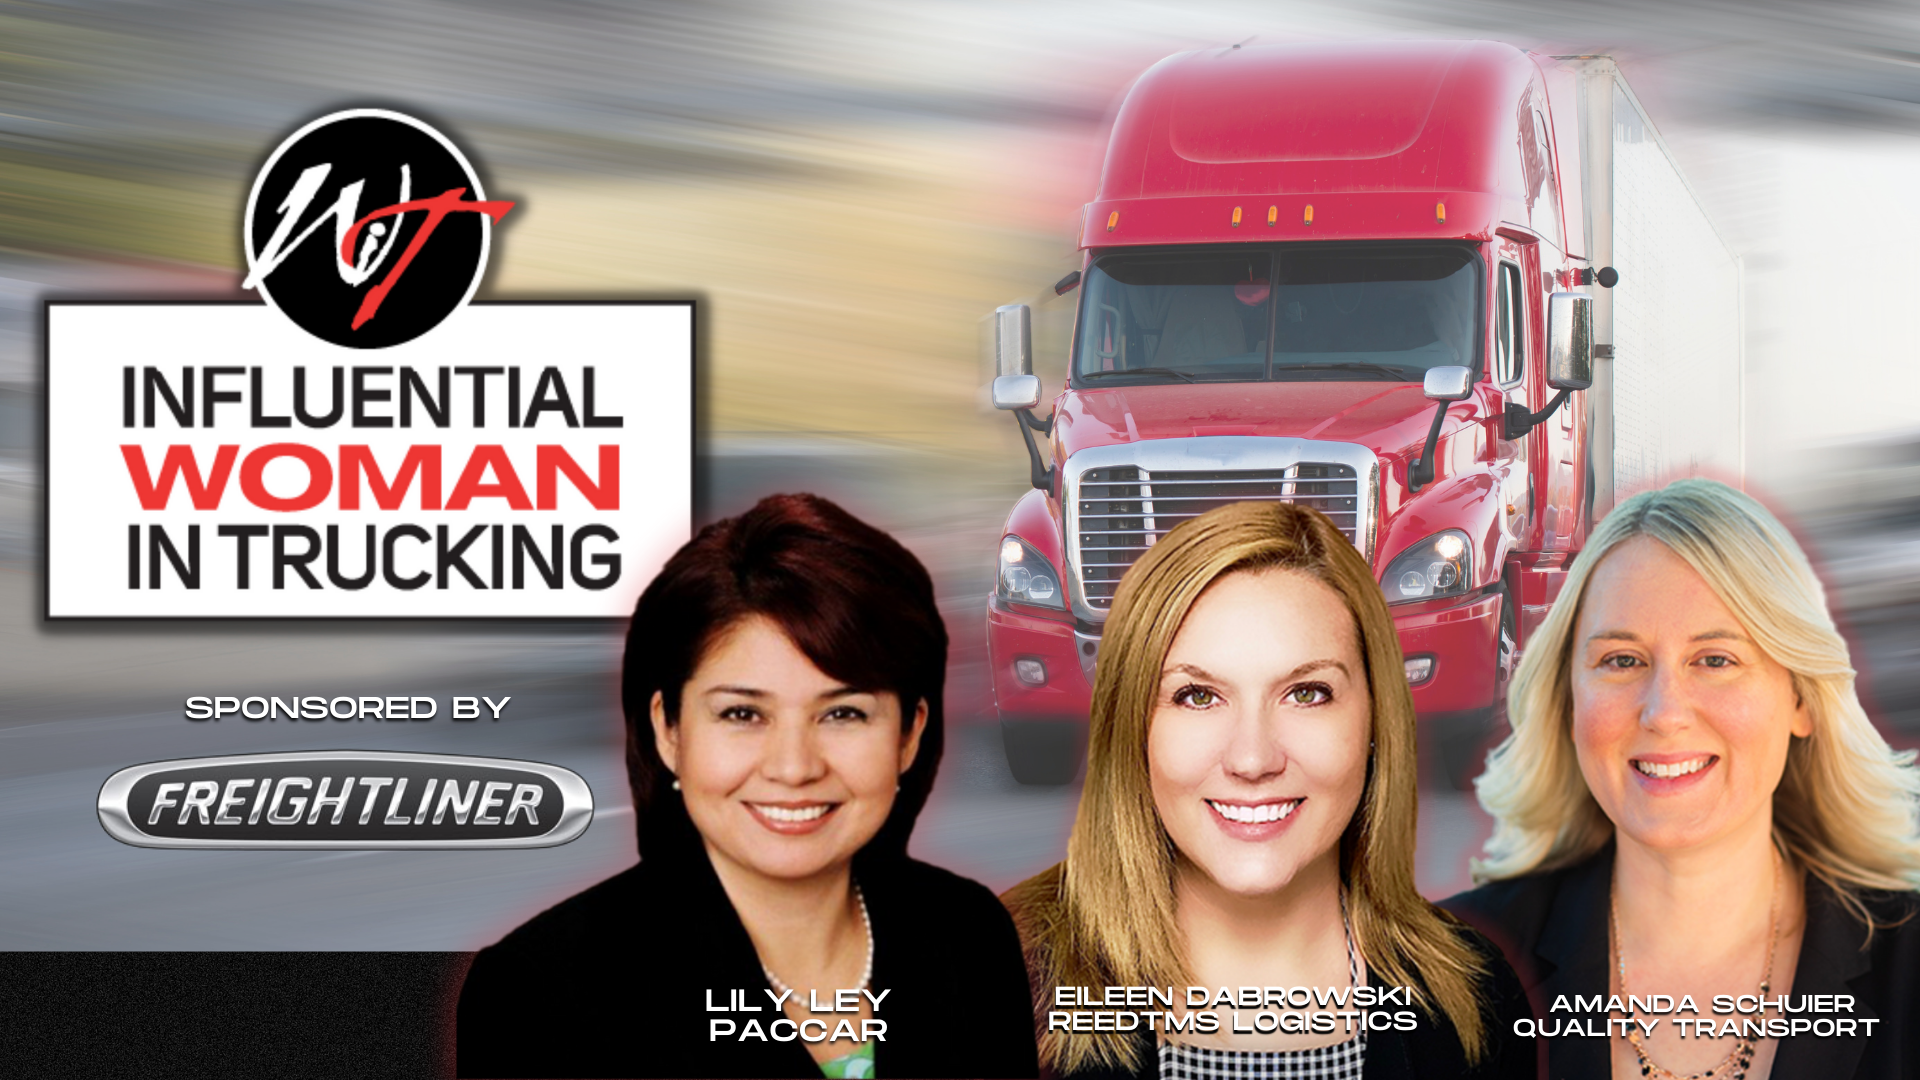 Women In Trucking Association Announces Finalists for 2021 Influential Woman in Trucking Award